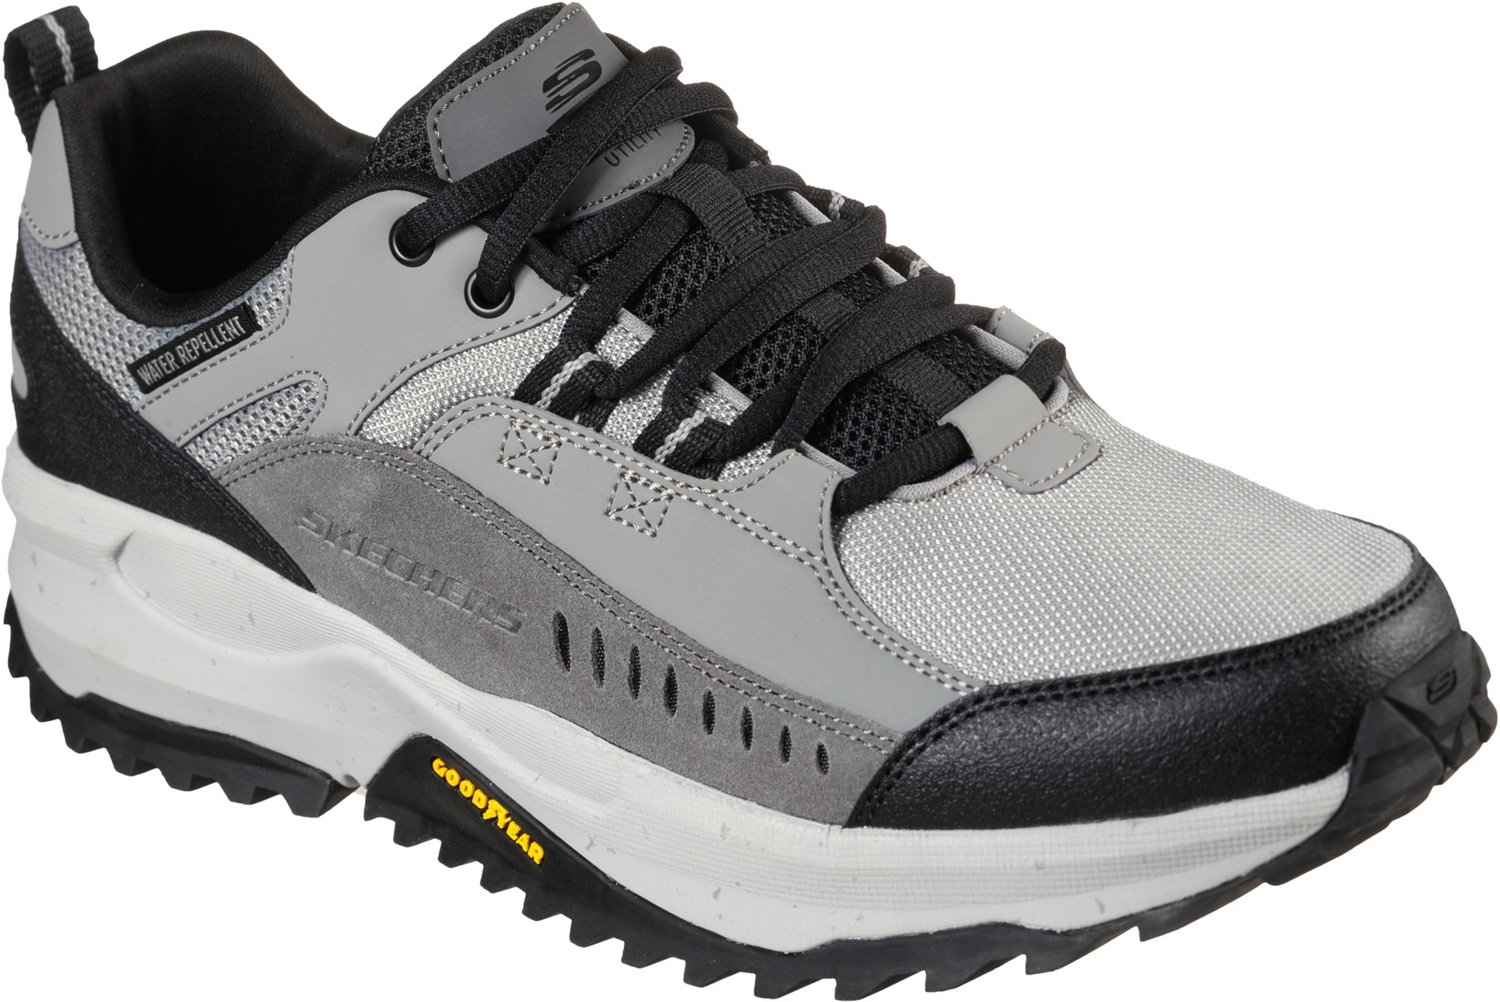 SKECHERS Bionic Trail Road Shoes | Academy